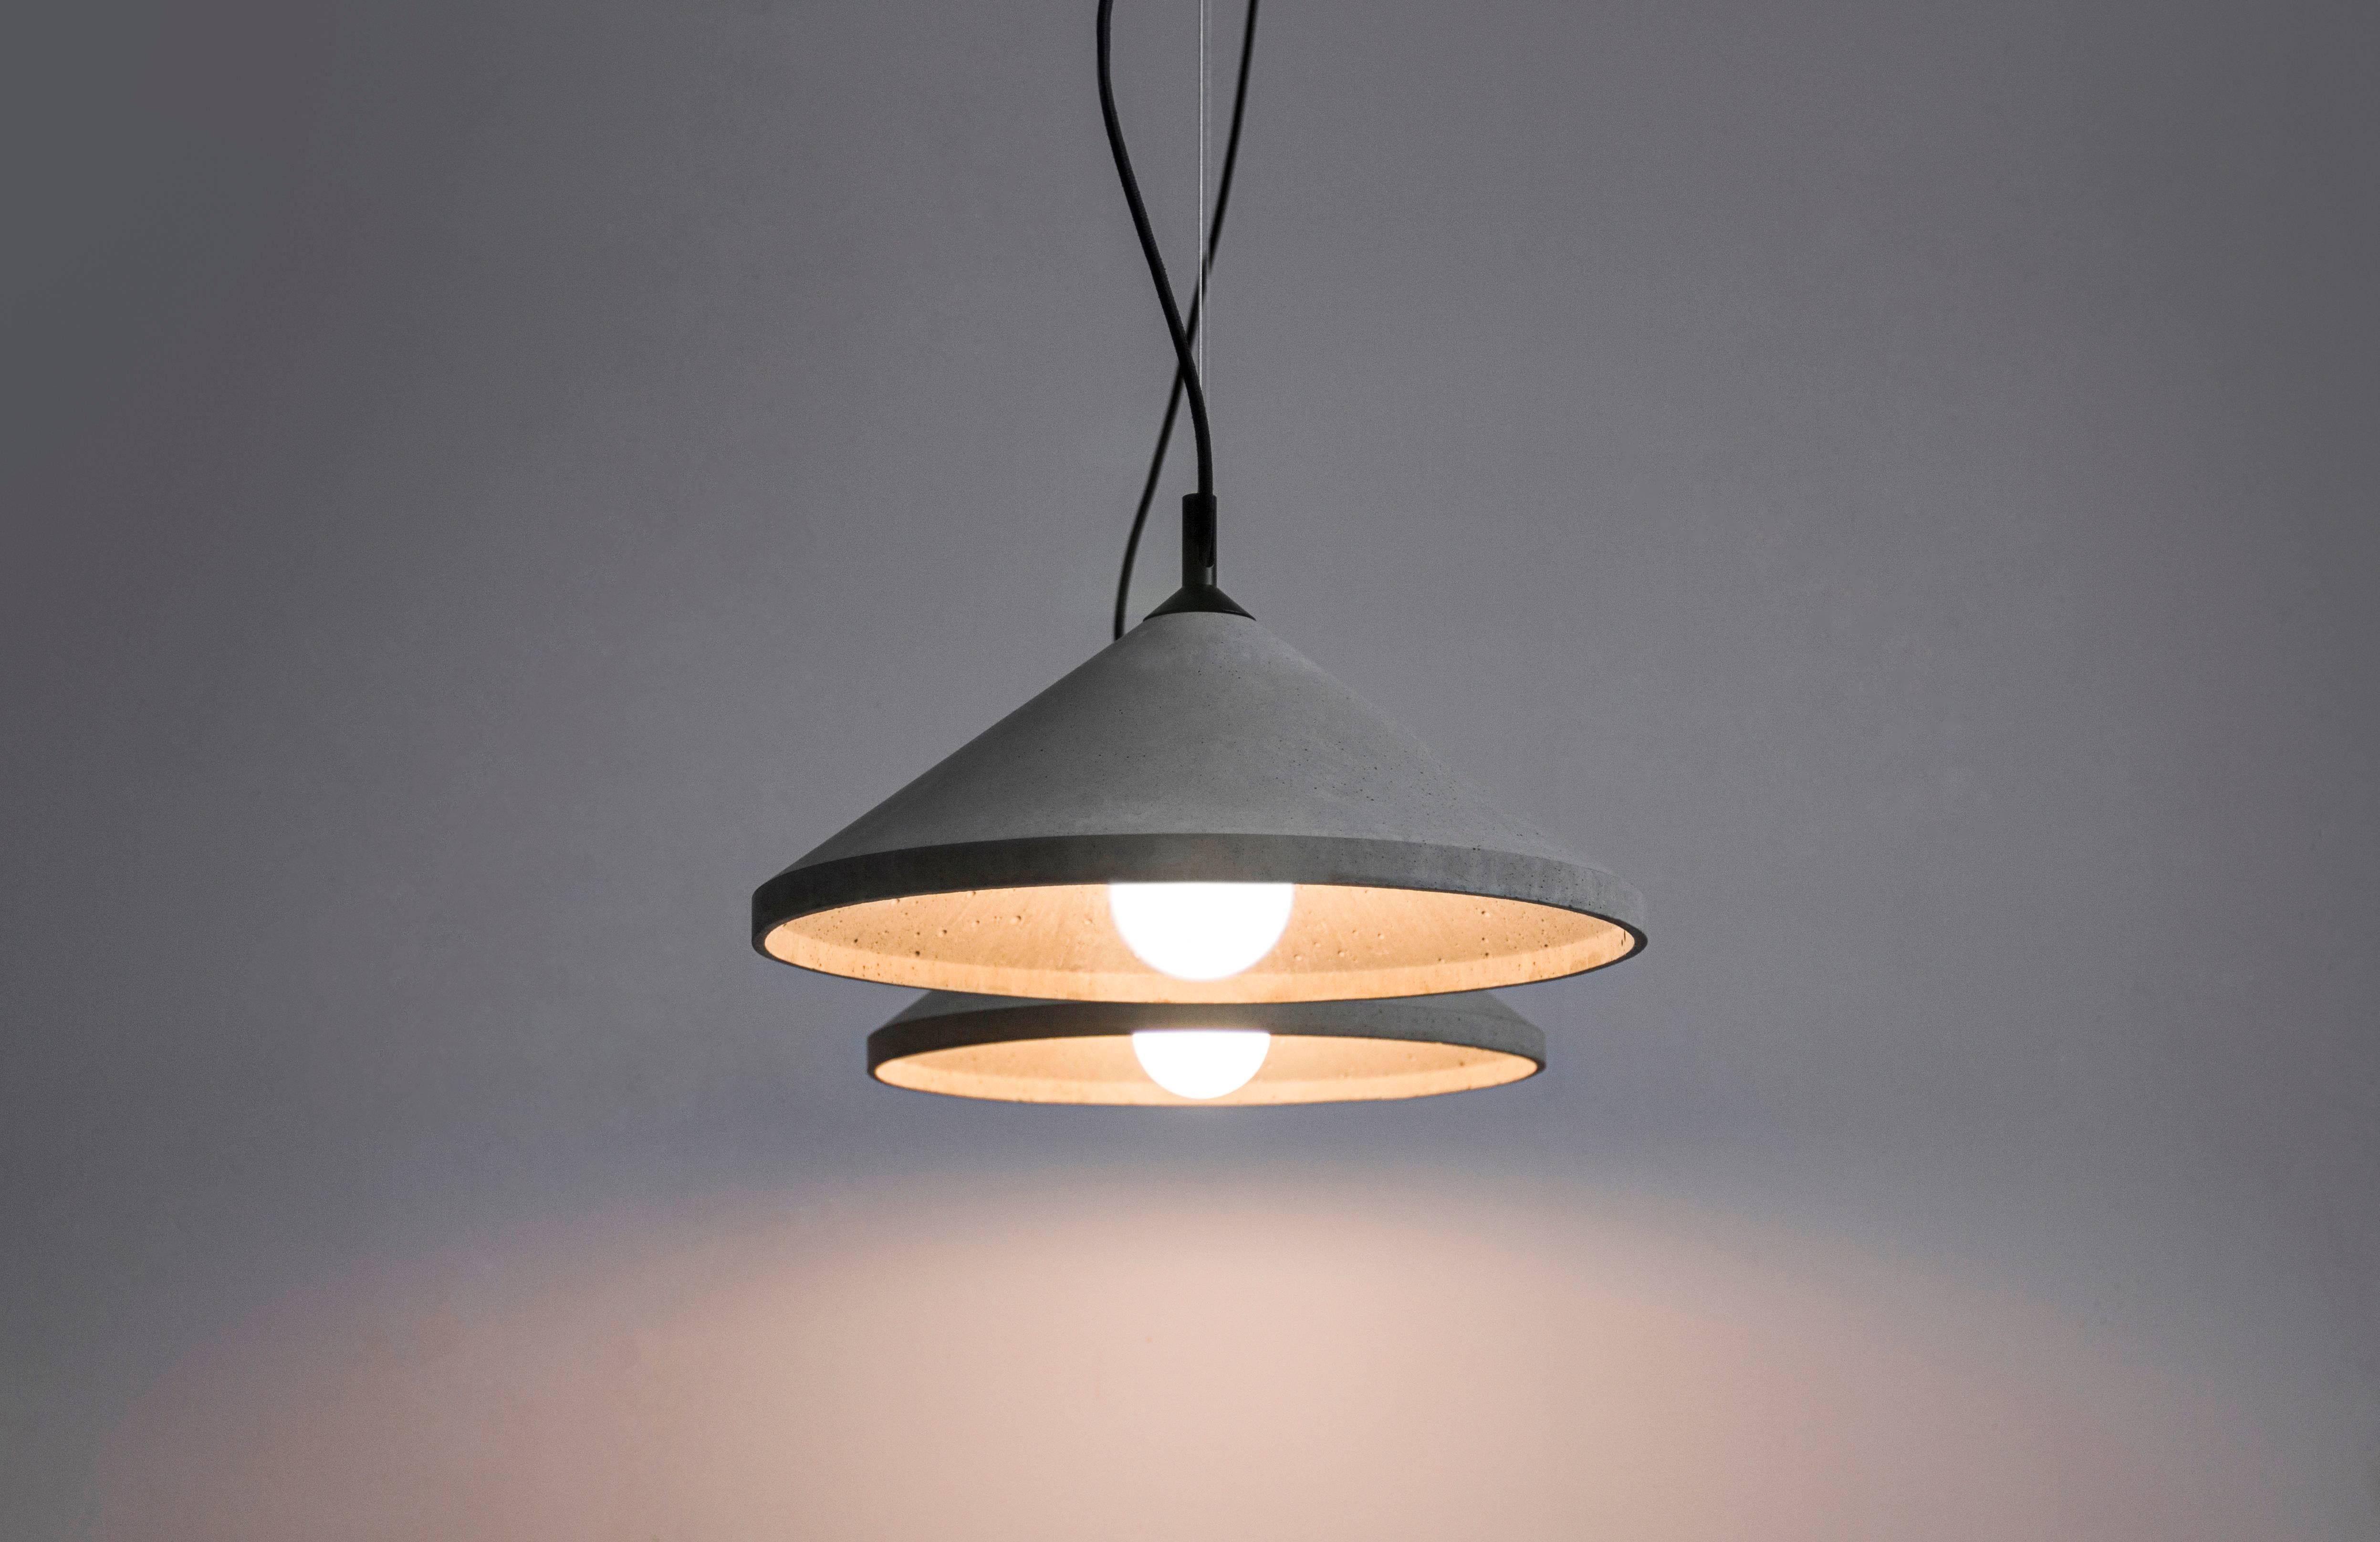 Ren 3
Concrete ceiling lamp designed by Cantonese studio Bentu Design

21 cm High; 40 cm Diameter
Concrete
Black wire 2m adjustable. 
Bulb E27 LED 7W 100-240V 80Ra 700LM 3400K

These pendant lamps are available in 3 different dimensions with two